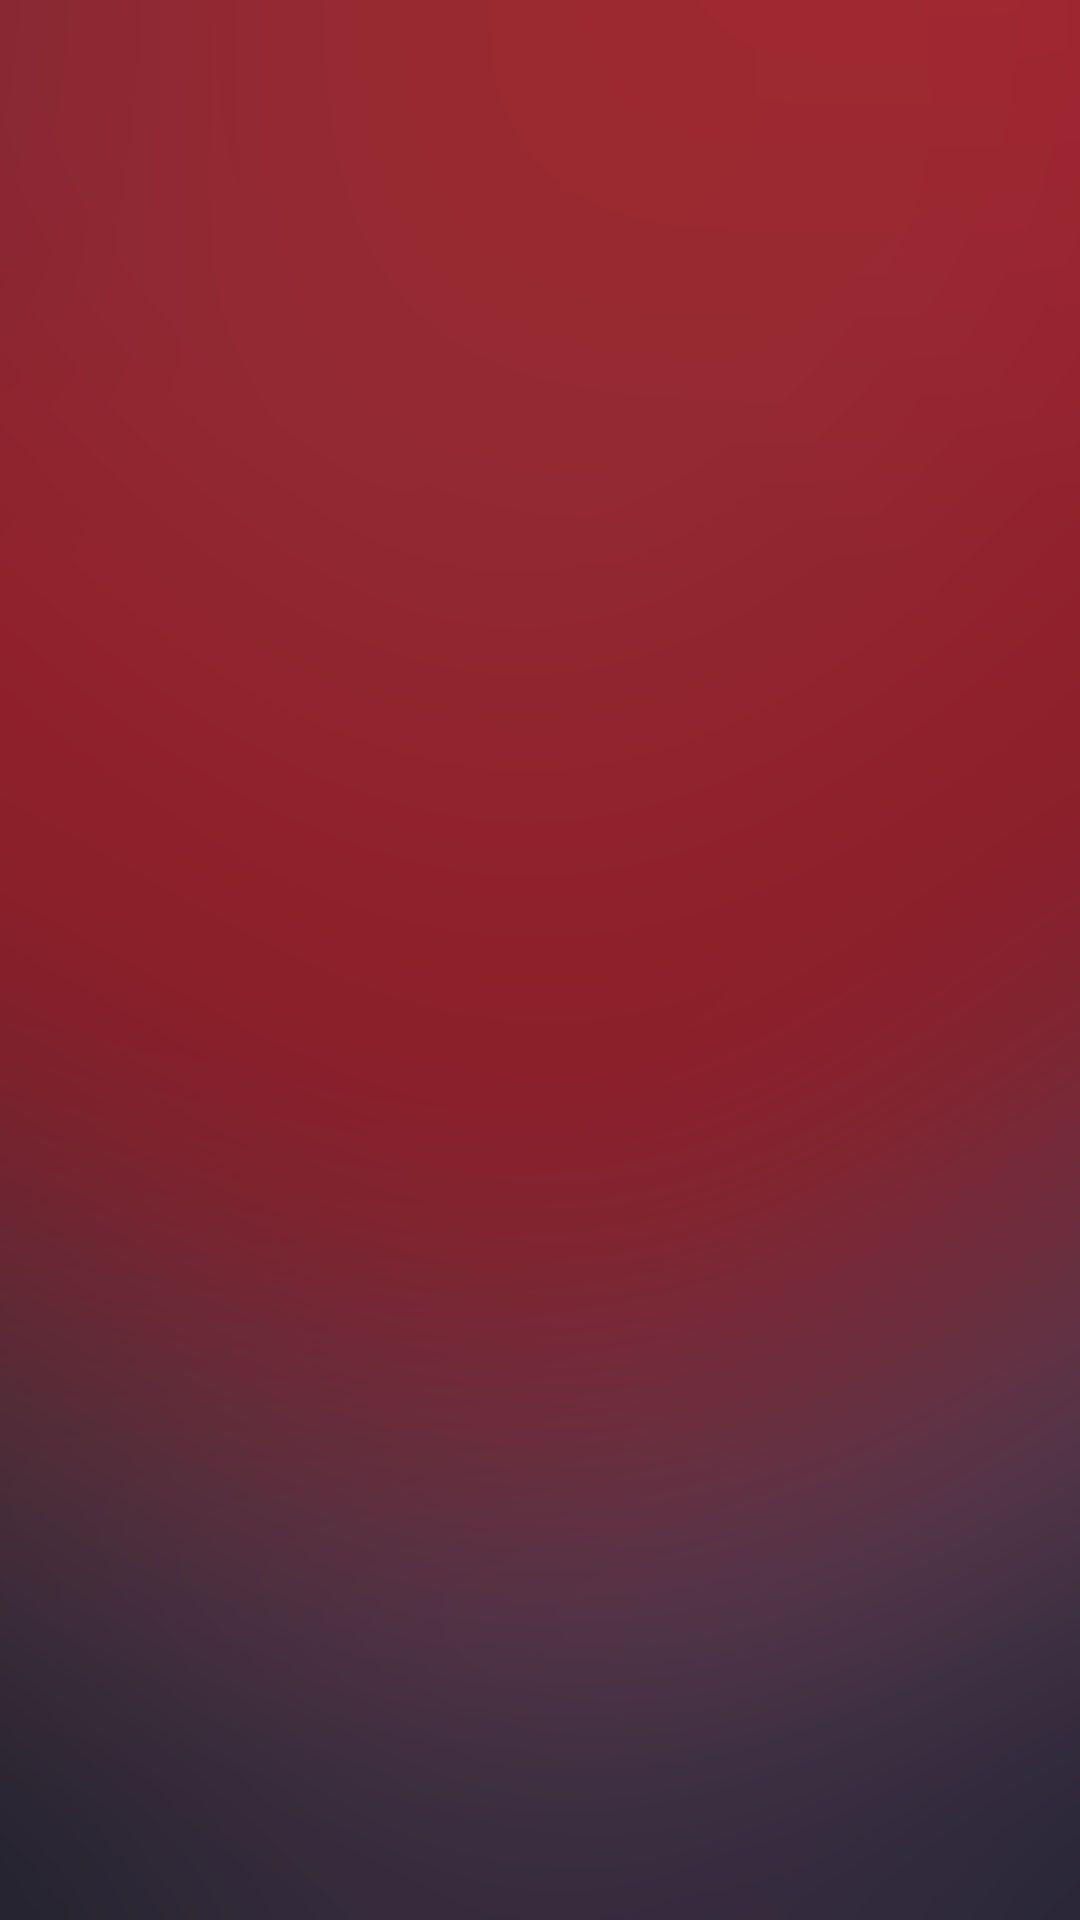 1080x1920 Red Gradient Wallpapers